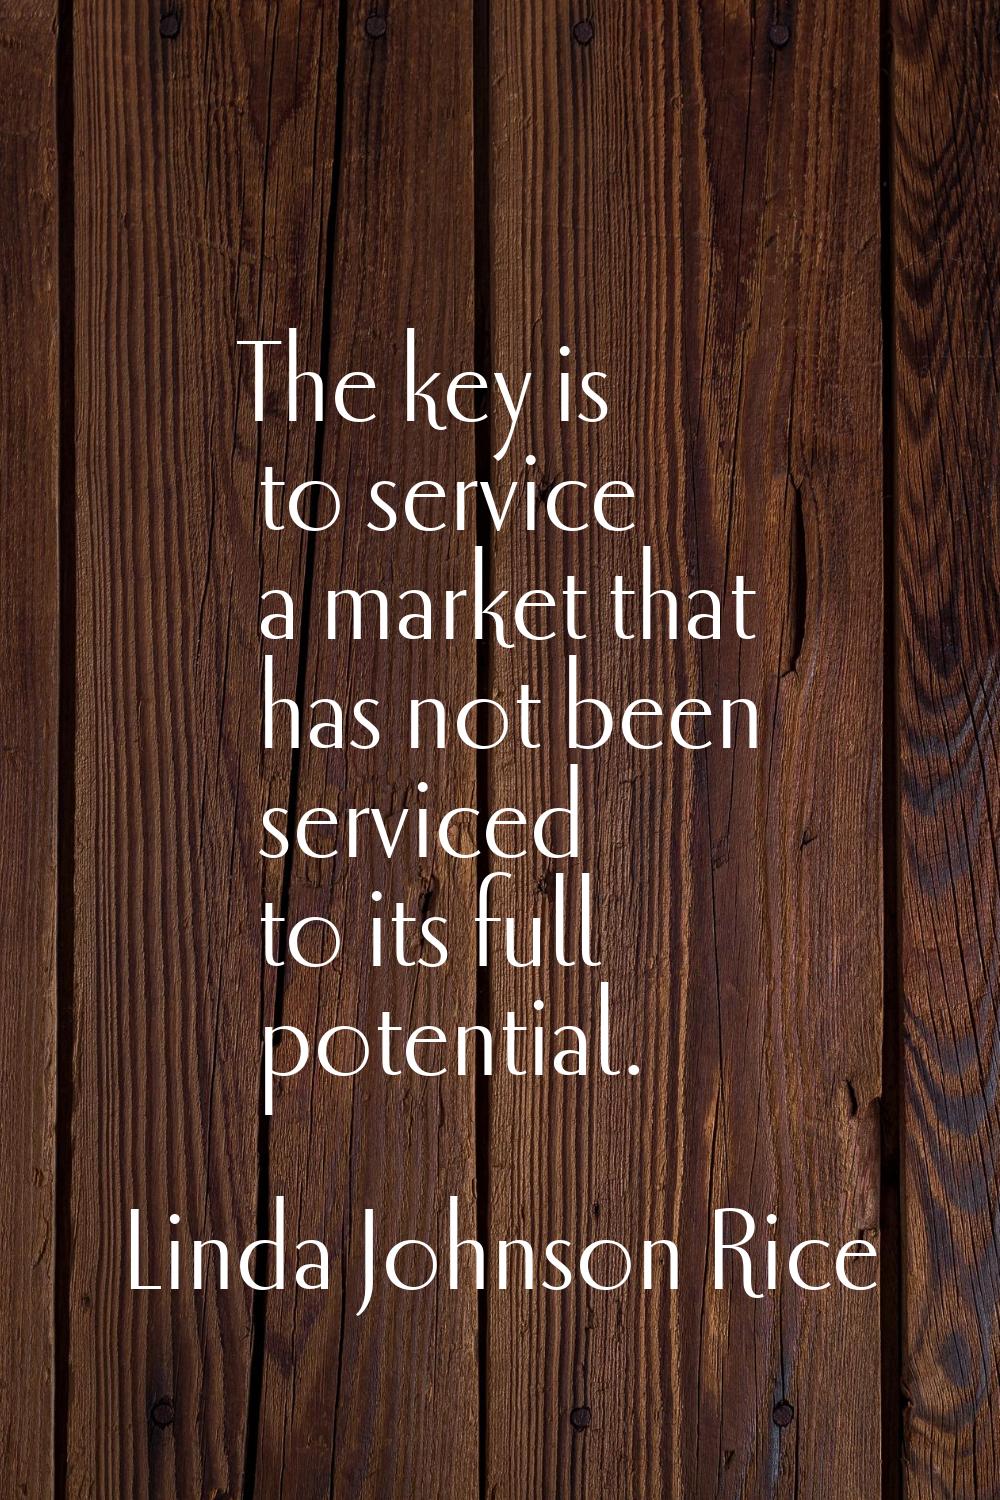 The key is to service a market that has not been serviced to its full potential.